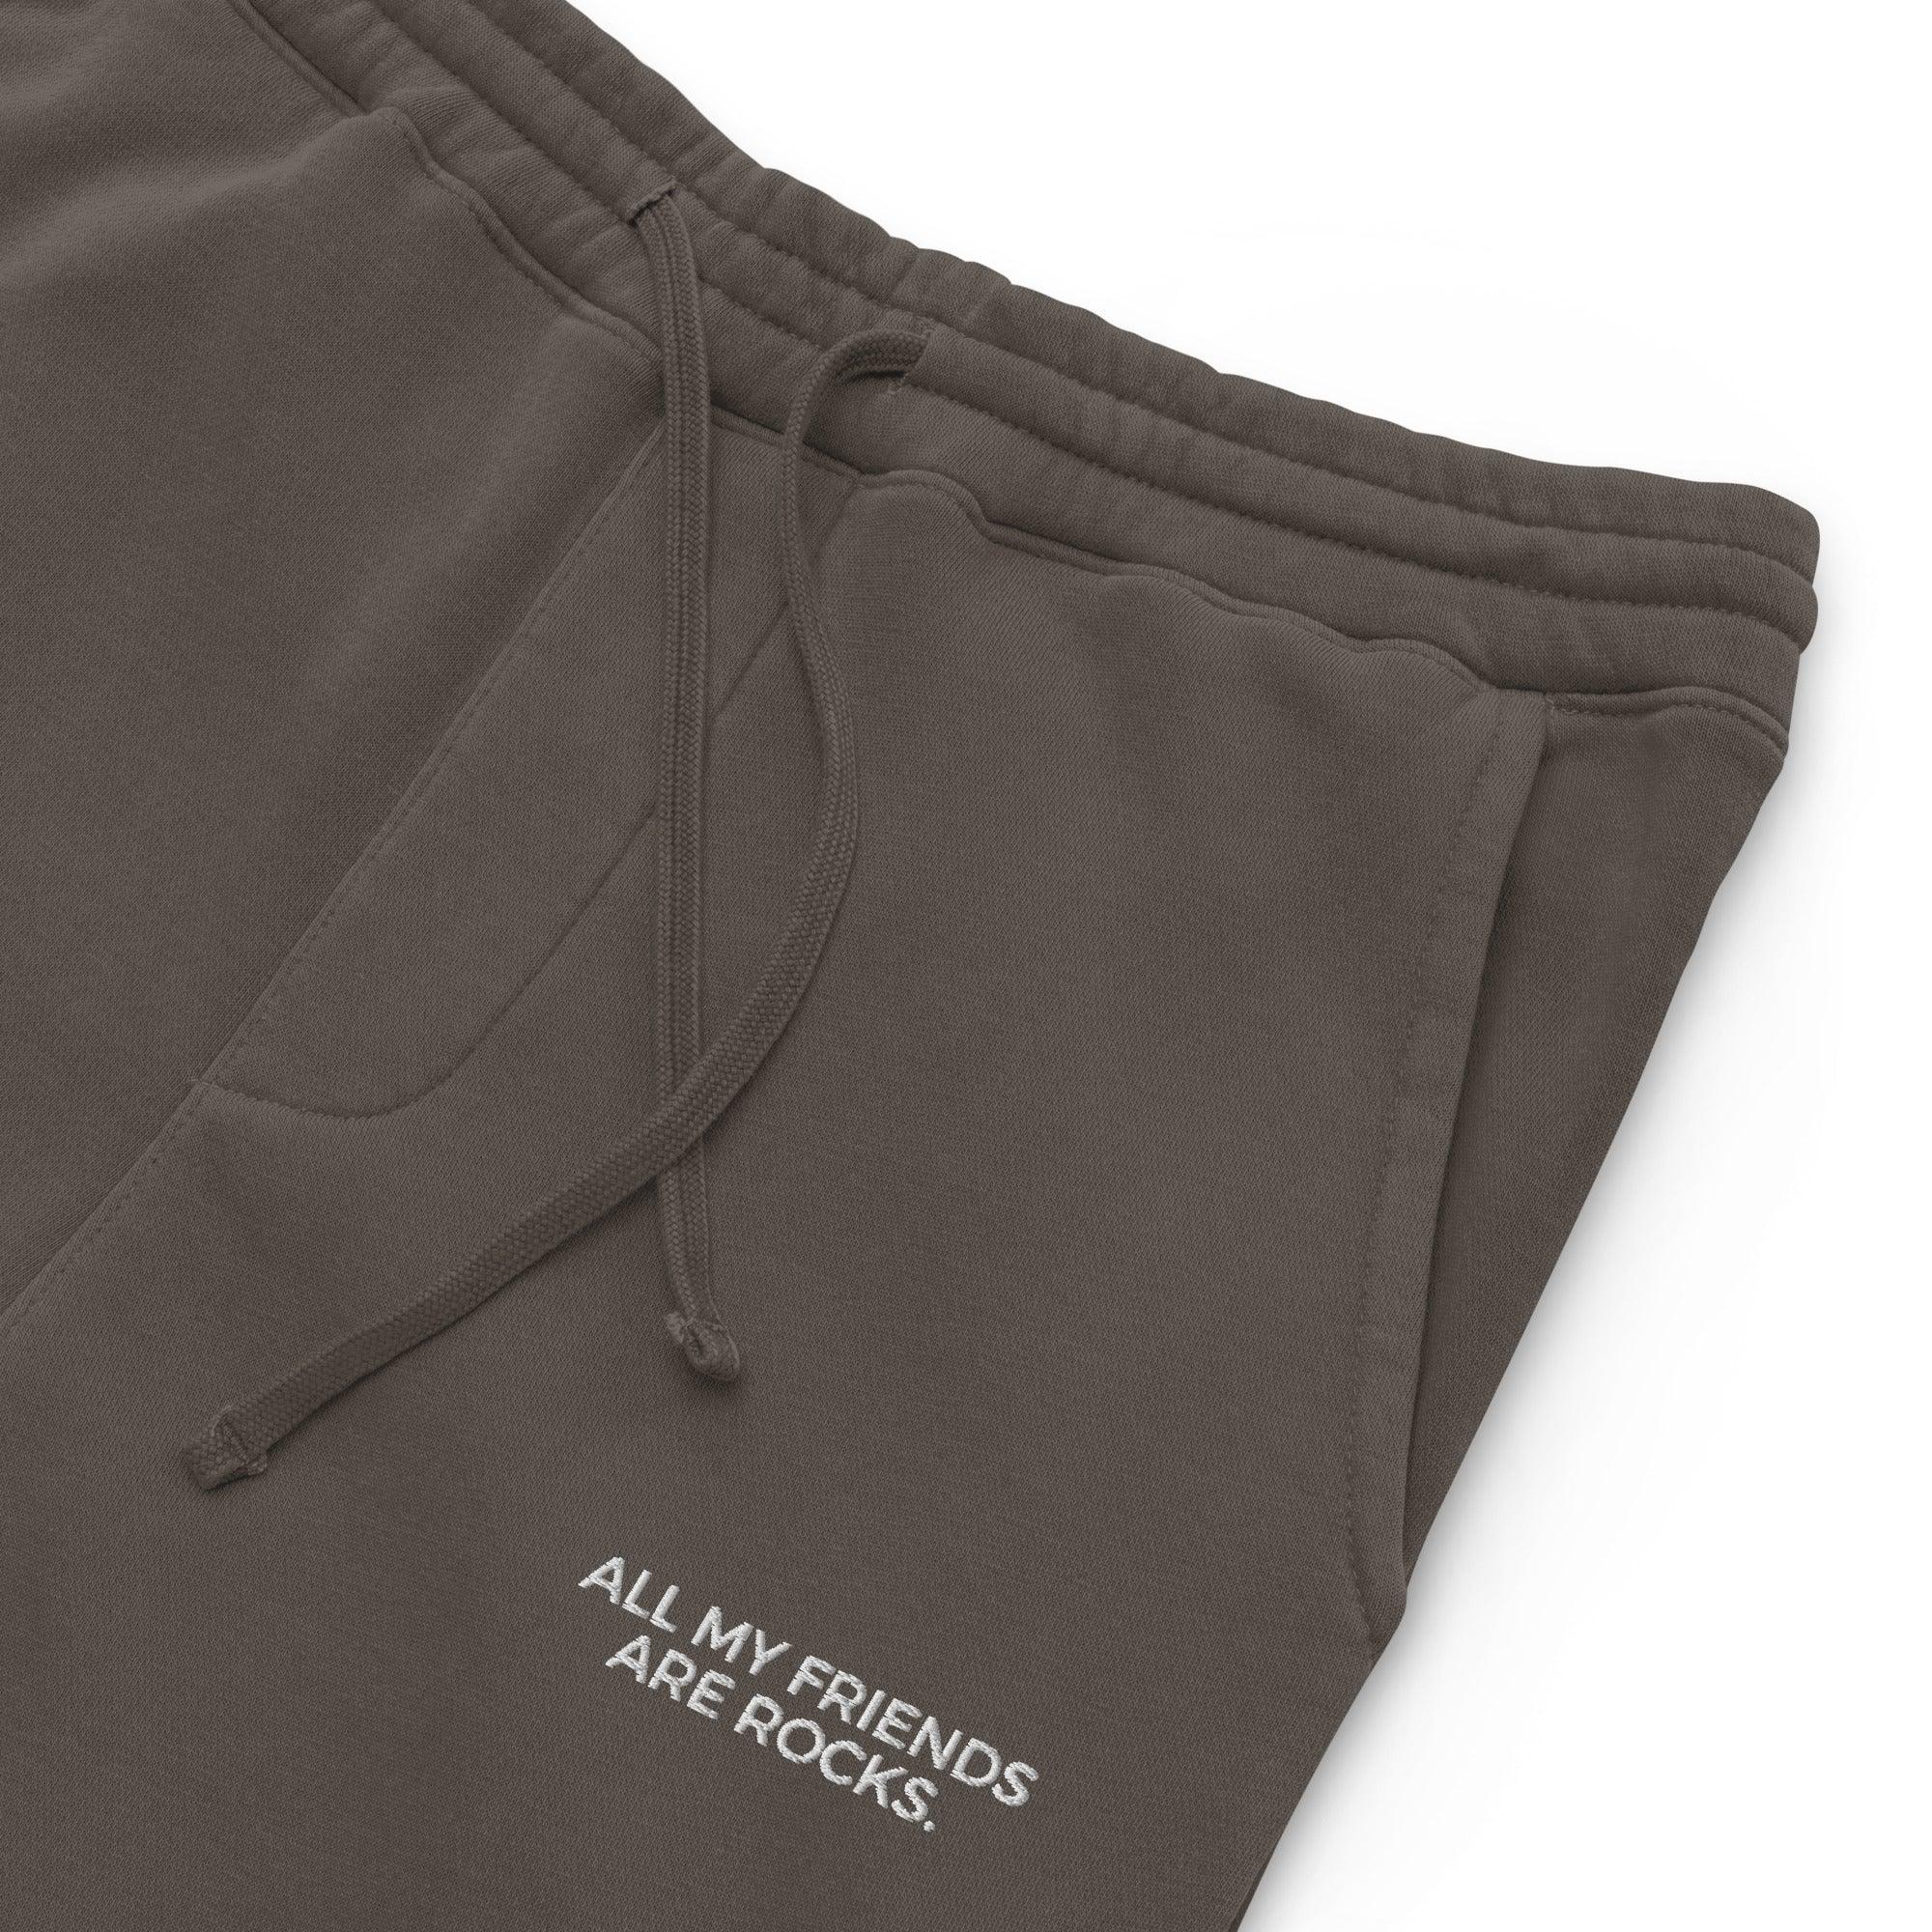 ALL MY FRIENDS ARE ROCKS - PIGMENT-DYED JOGGER SWEATPANTS - apparel - The Mineral Maven